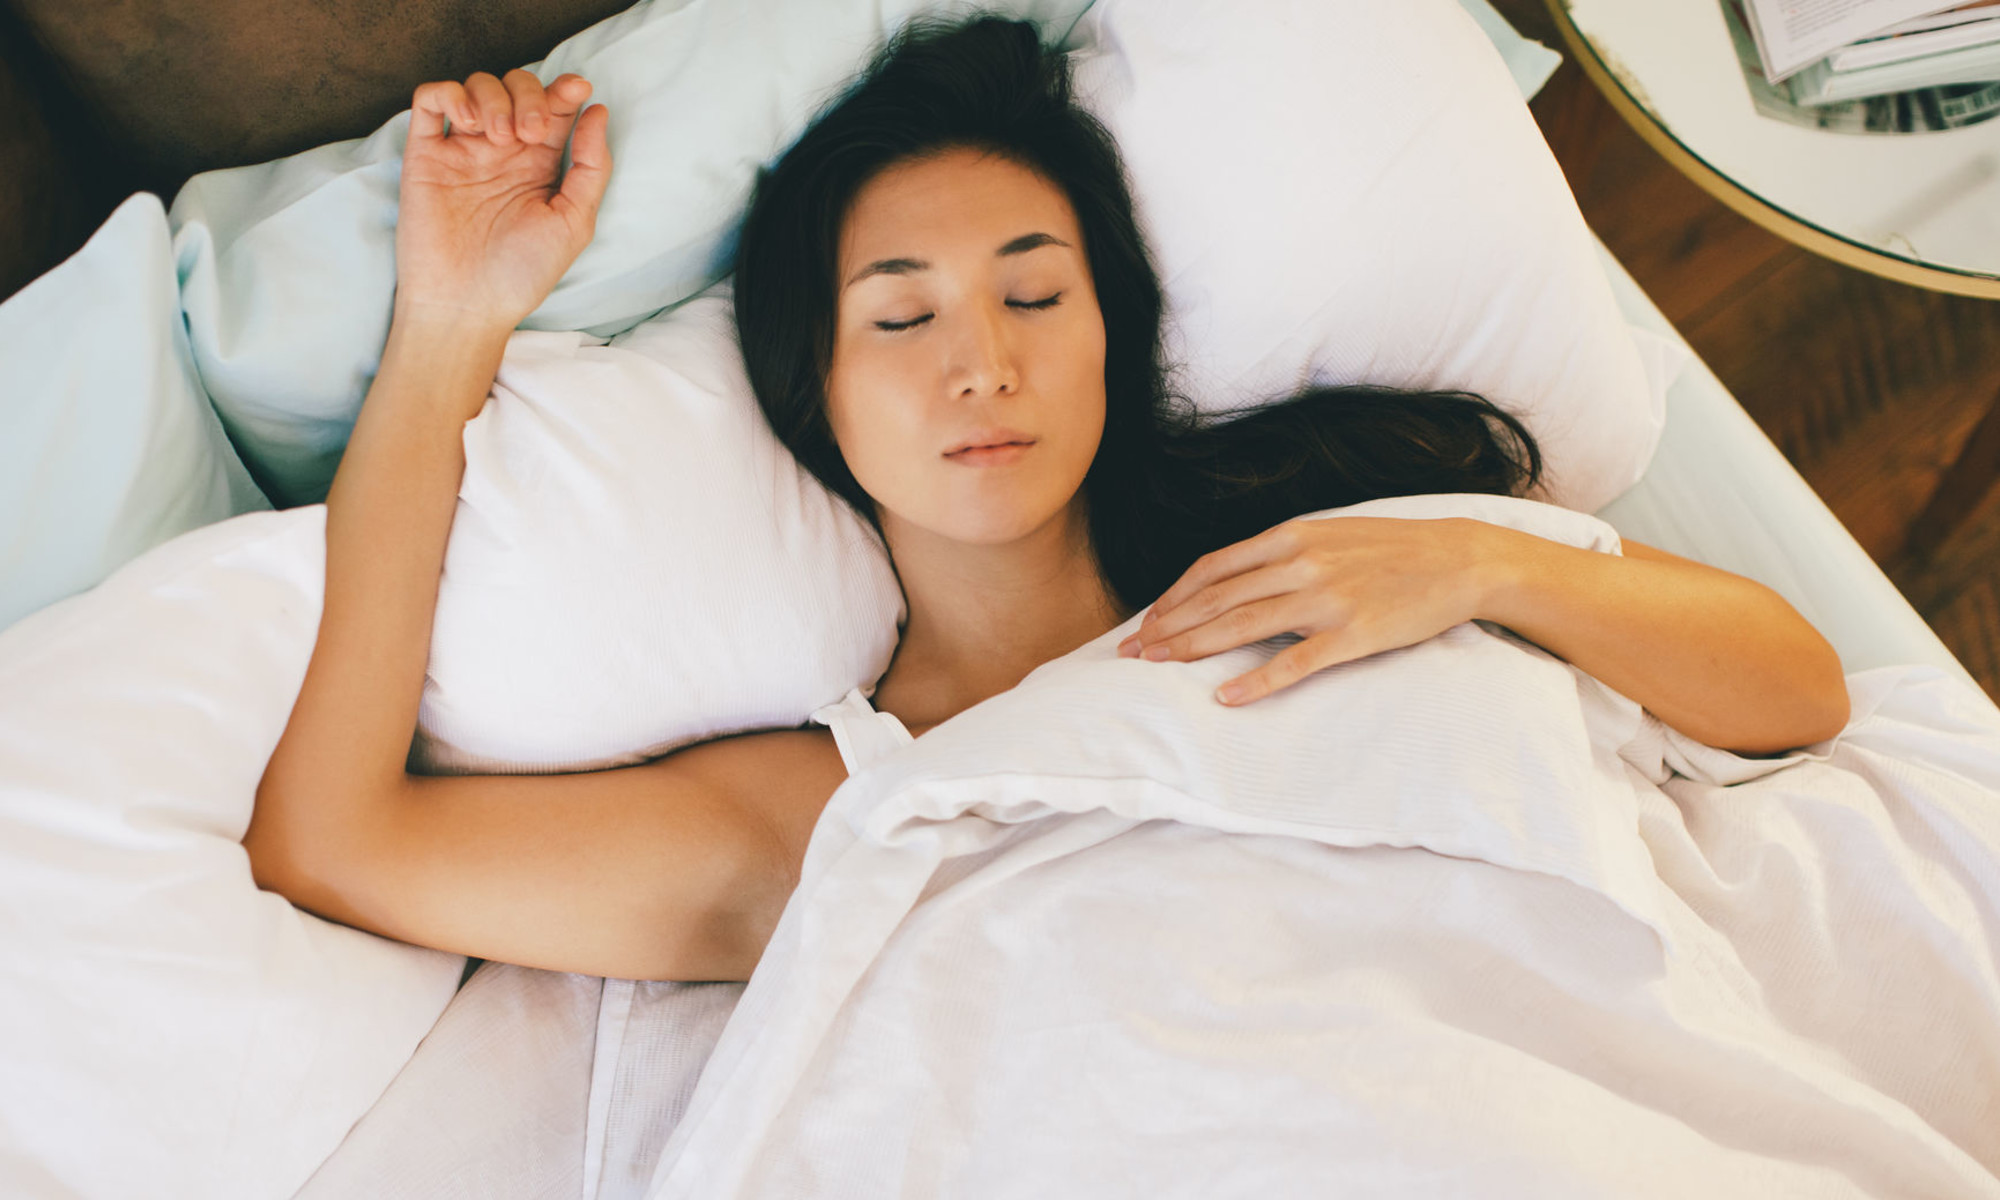 Is It Bad To Sleep With Wet Hair? Experts Share Their Advice | mindbodygreen